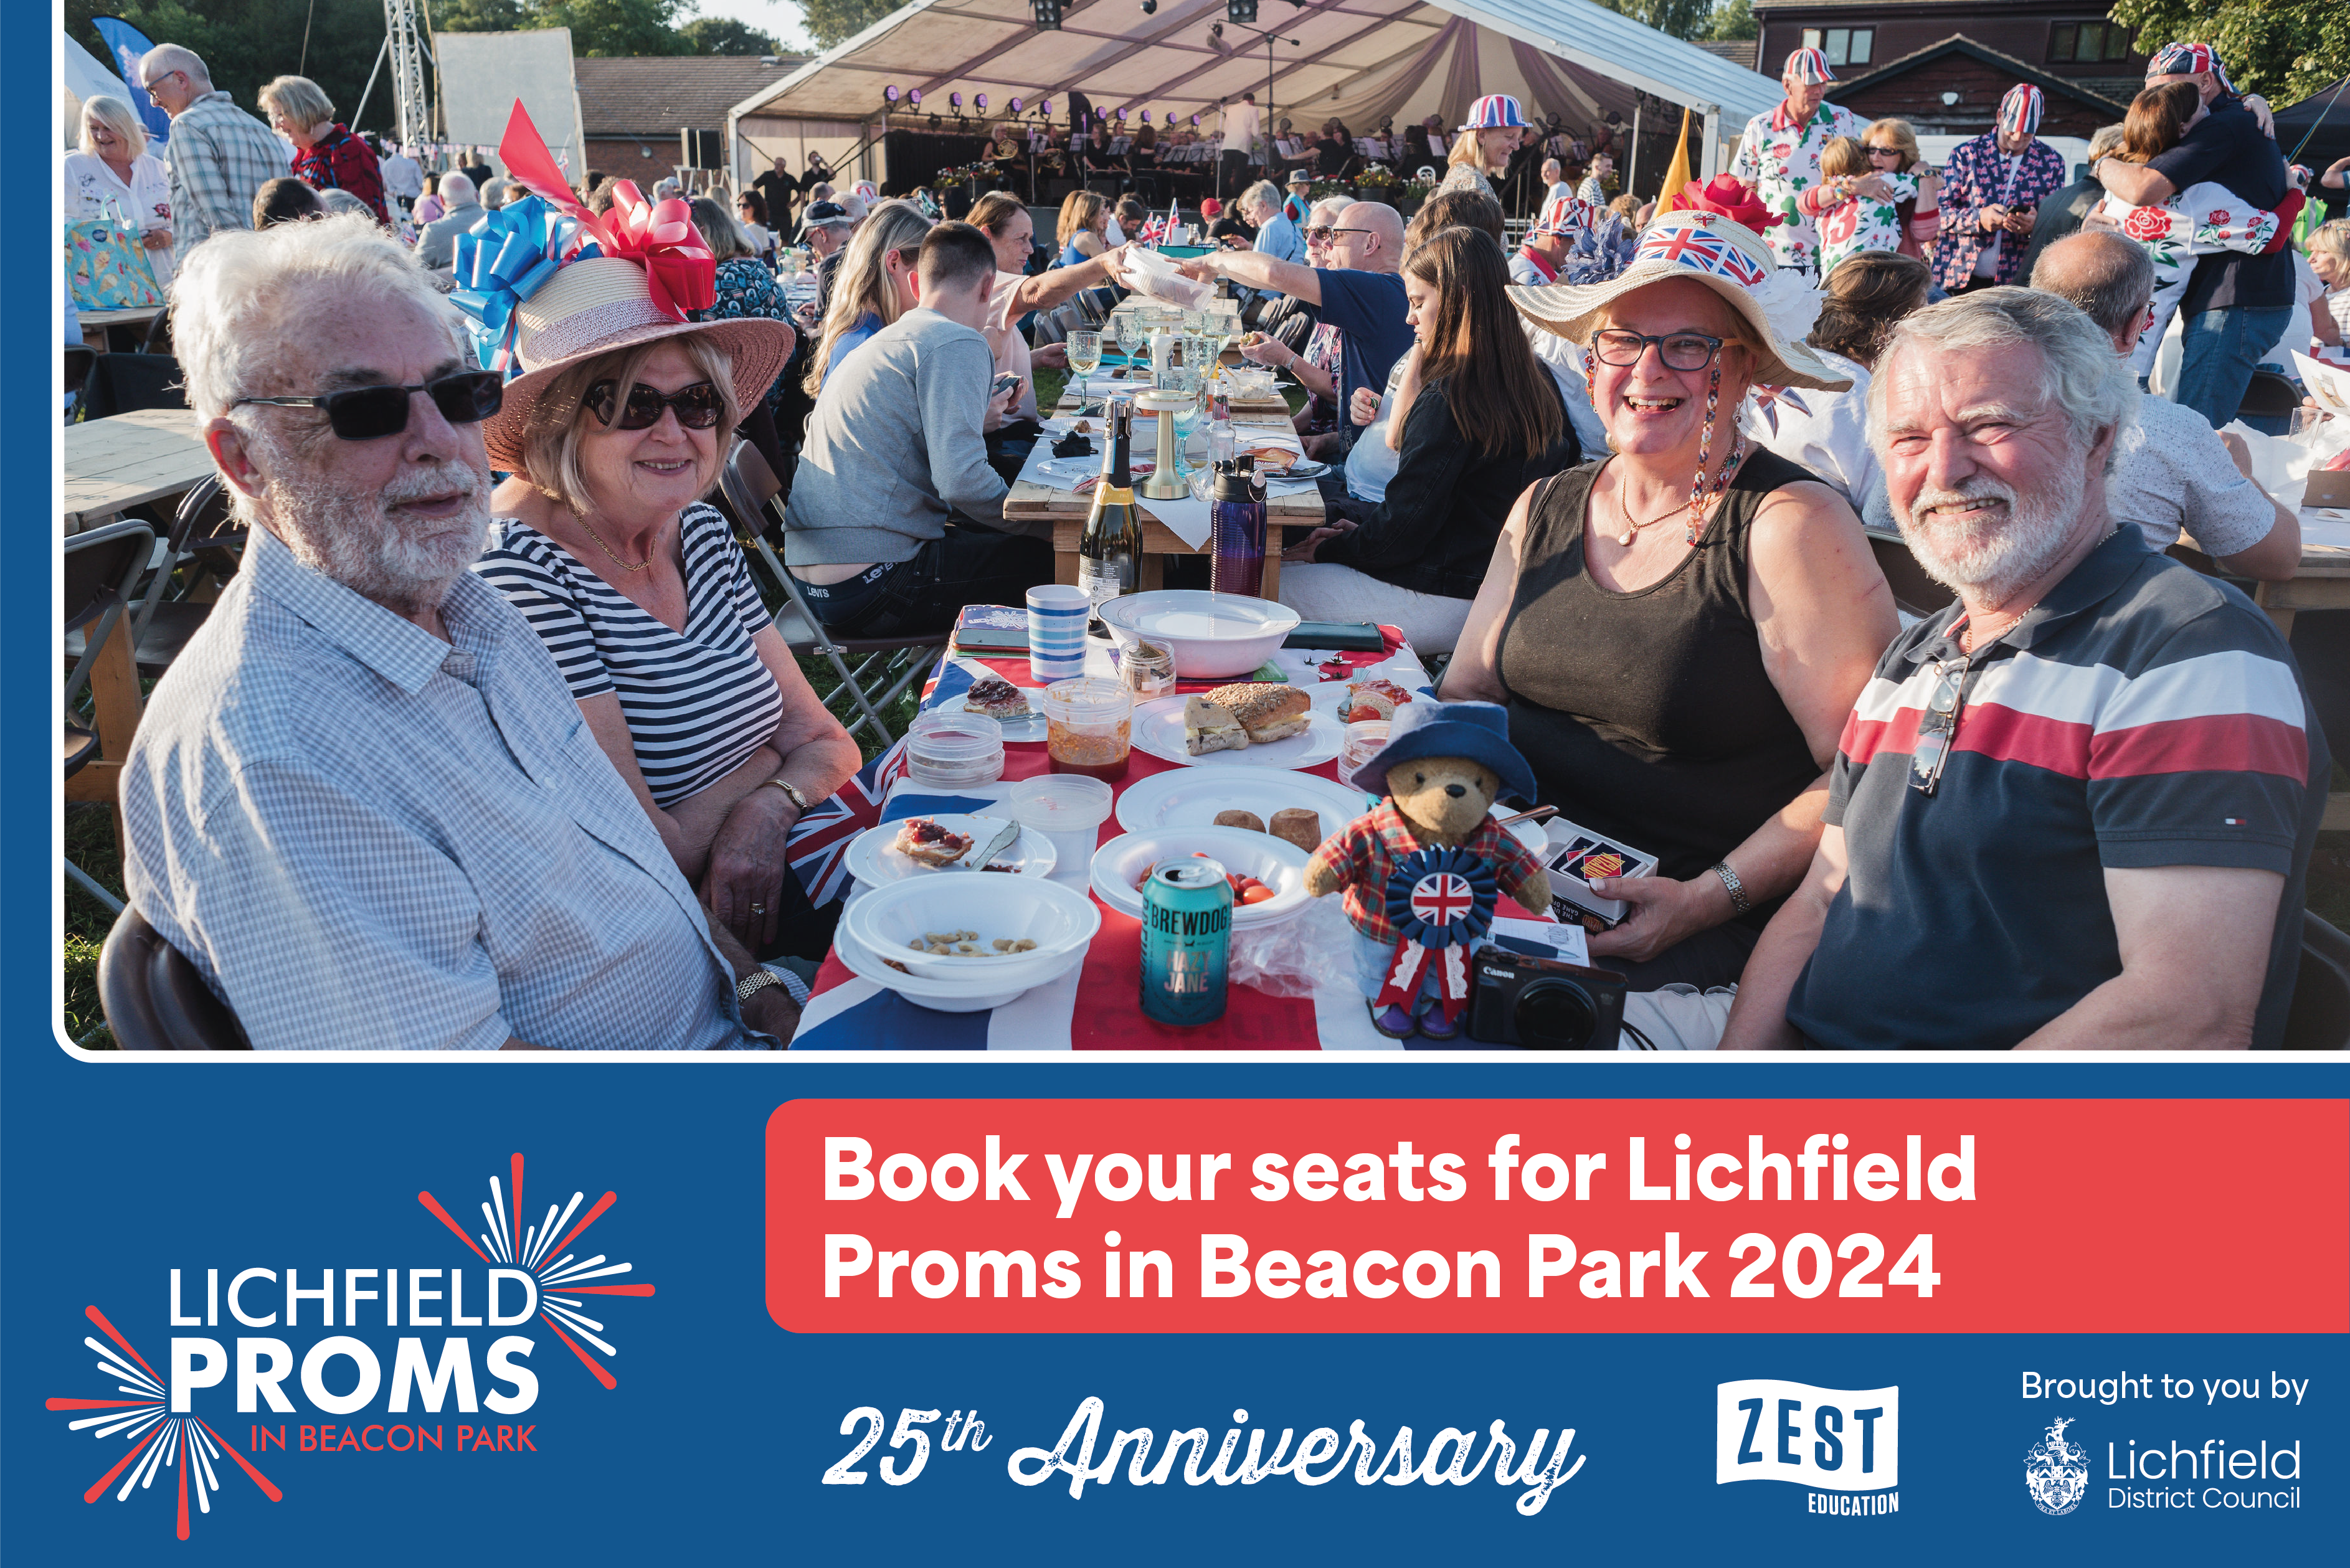 An image to promote prime seating at Lichfield Proms in Beacon Park